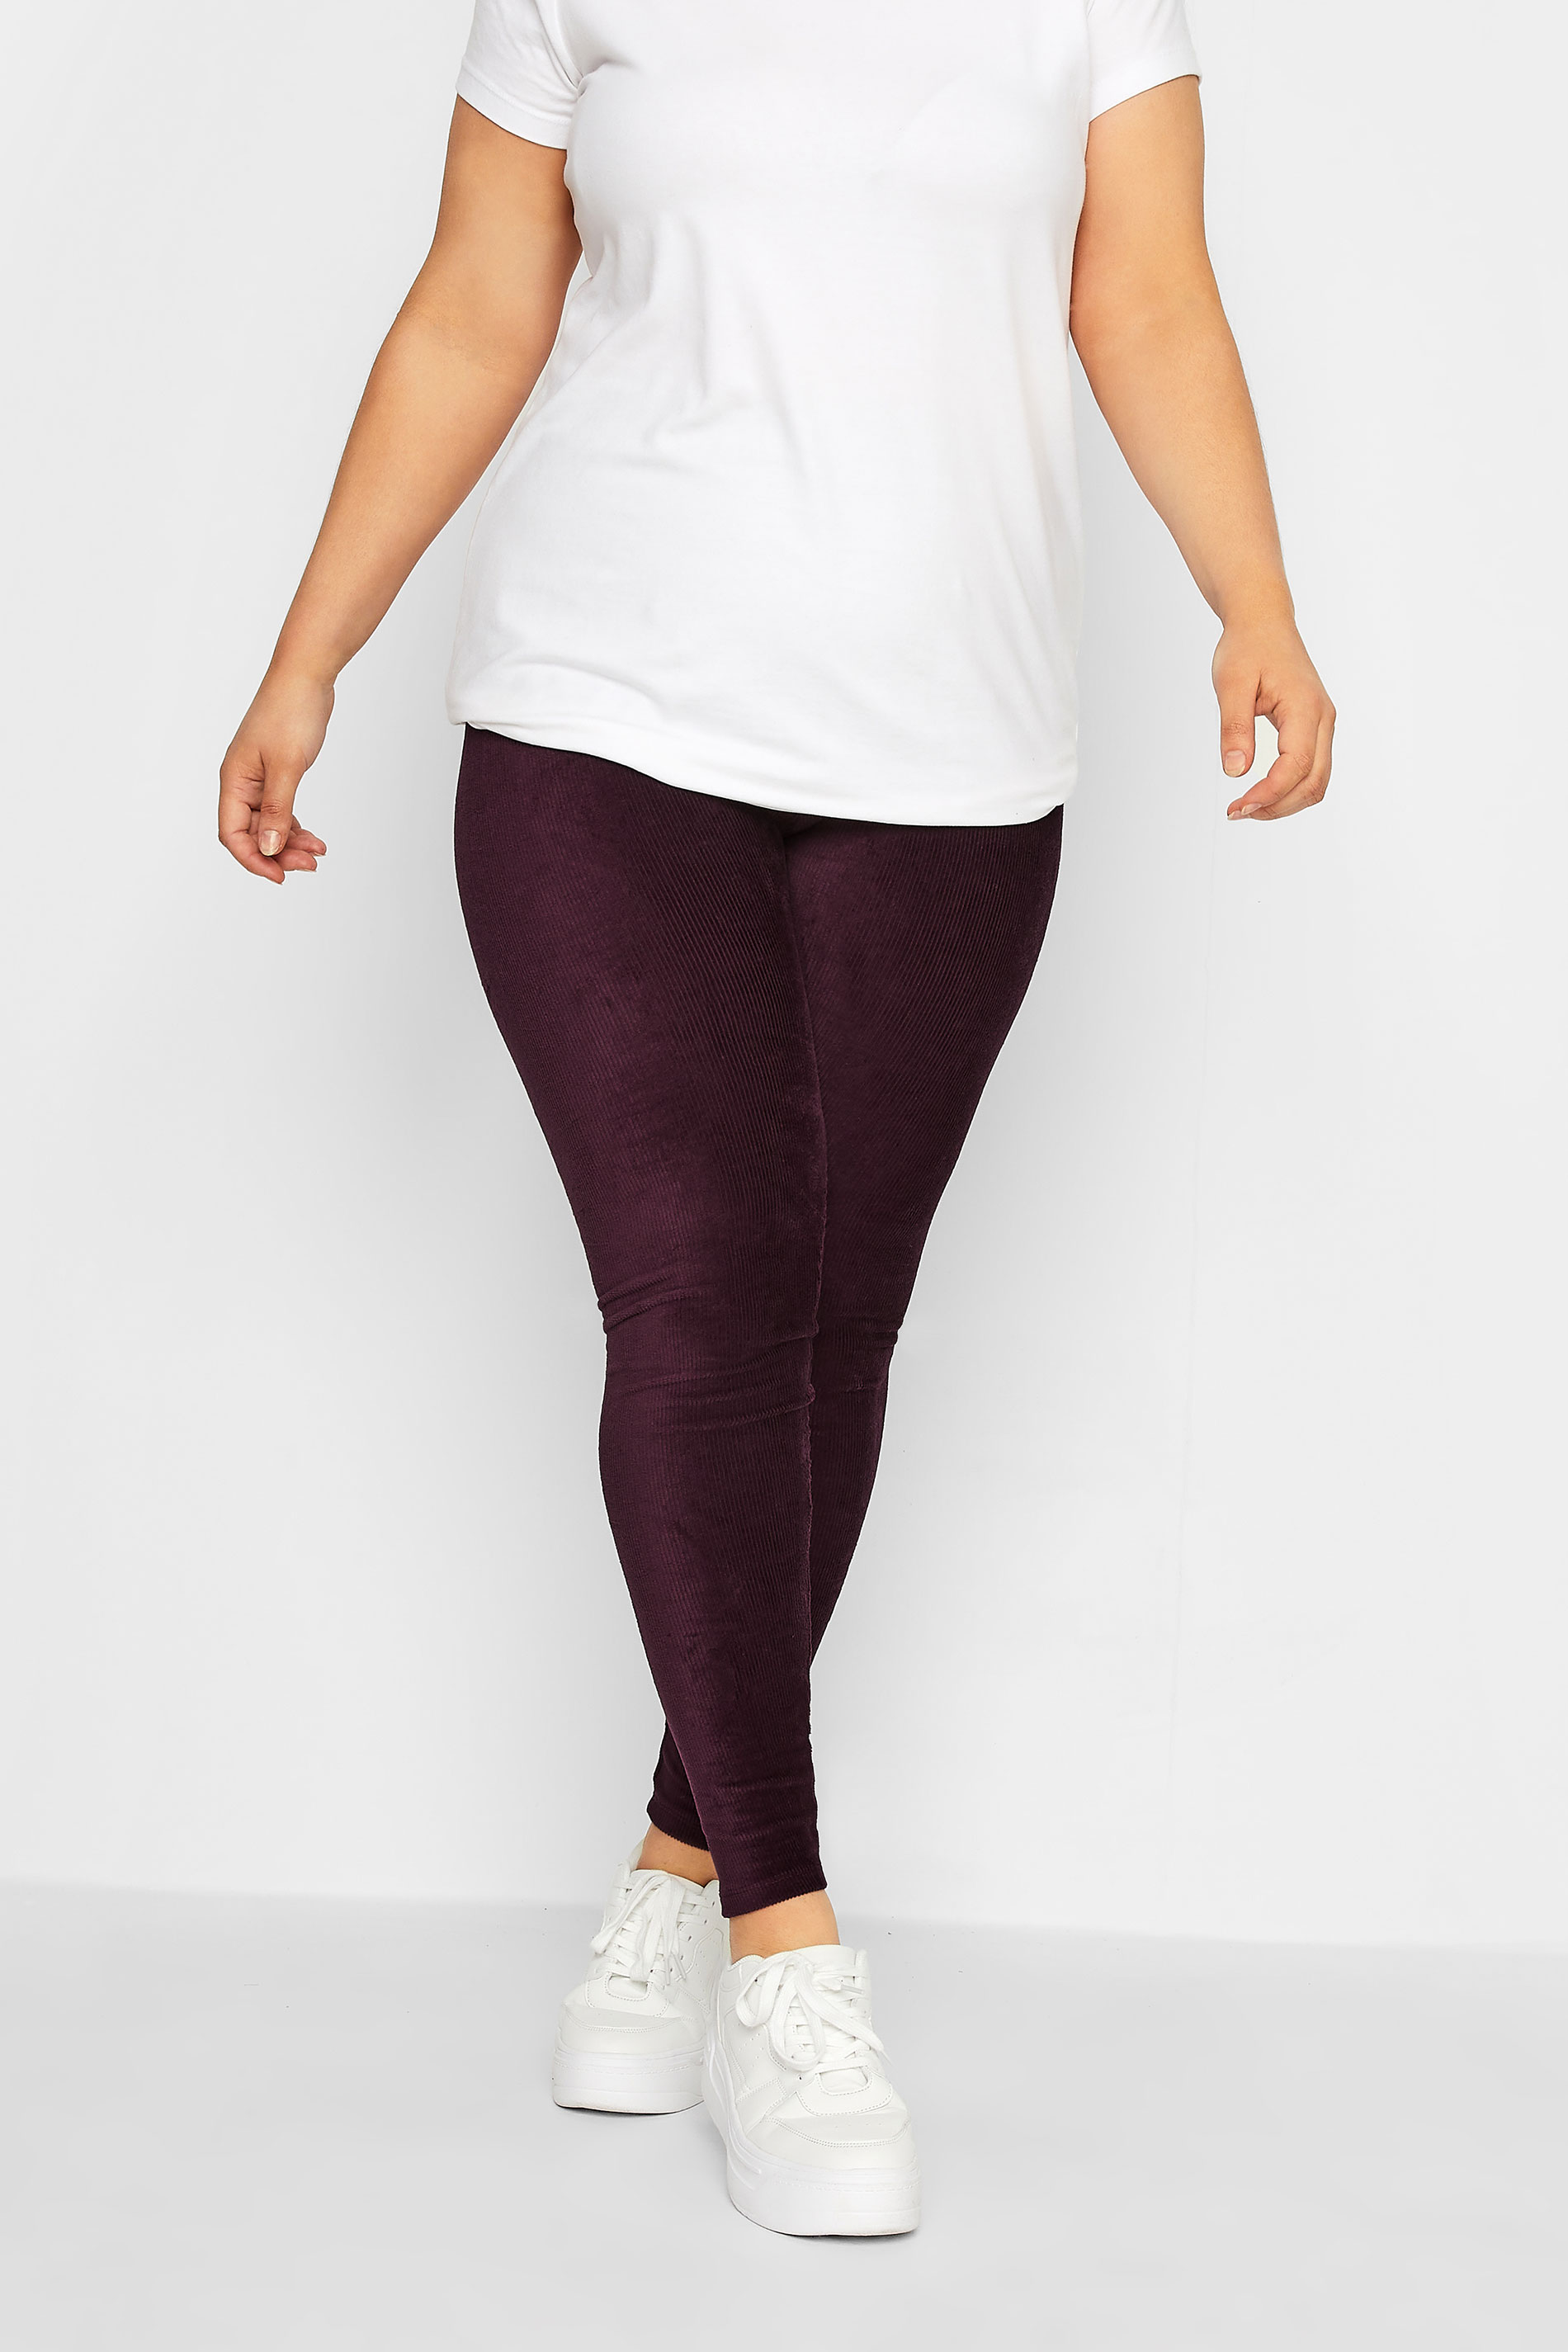 Plus Size Burgundy Red Cord Leggings | Yours Clothing 1